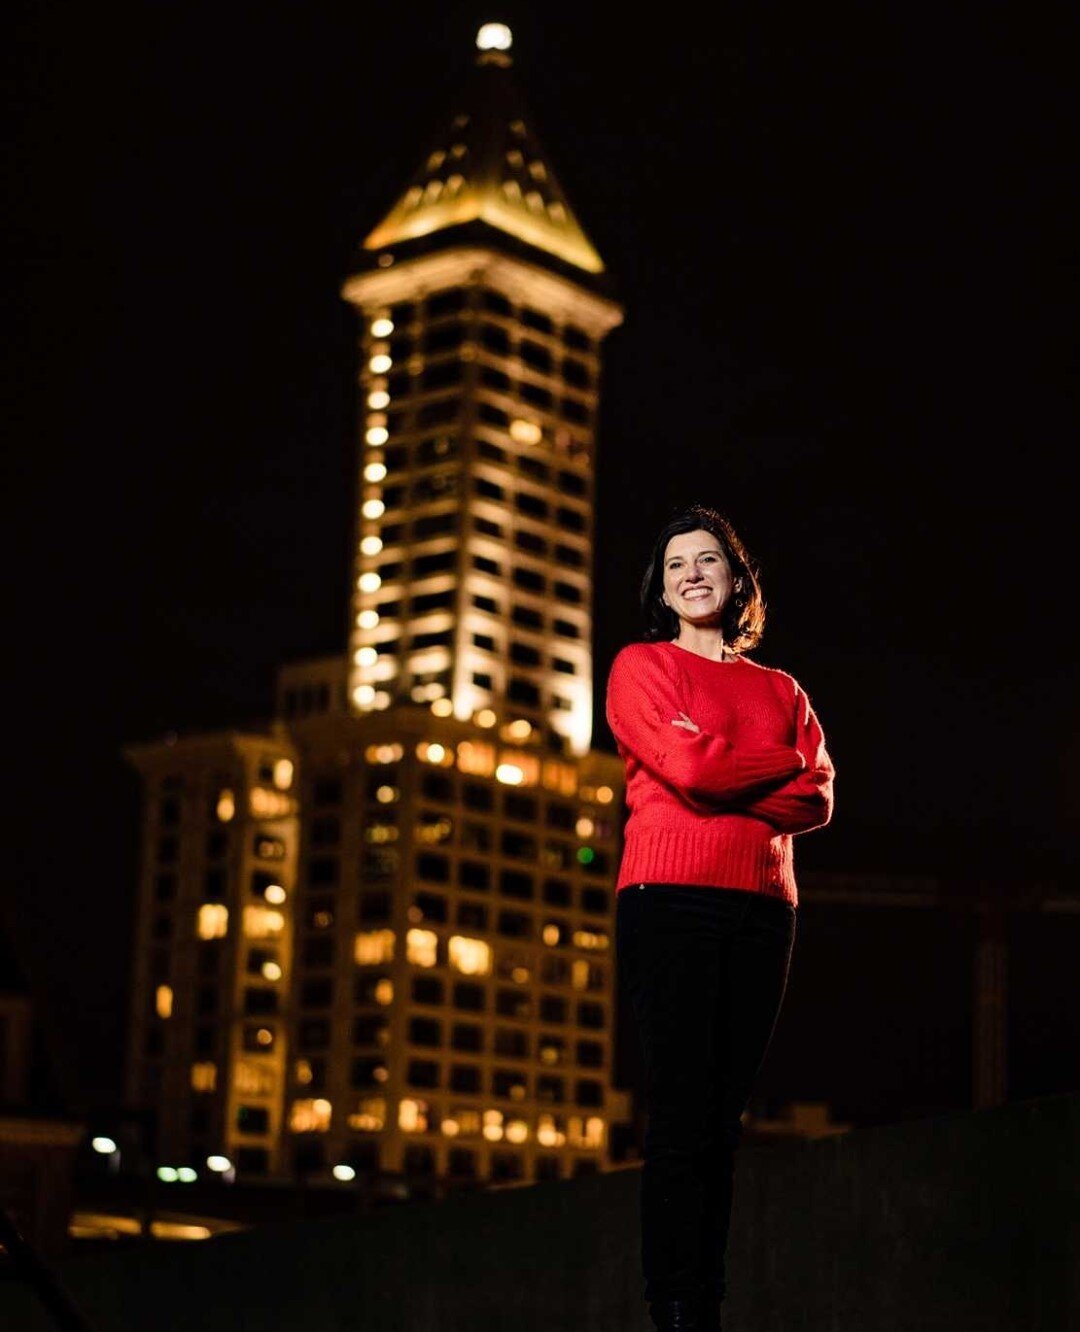 One of my clients is running for mayor of Seattle! Go visit her website at https://www.jessynformayor.com/ and see some more of my portraits of her. It is fun to see my work used for her campaign. ⁠
⁠
#seattleeditorialportrait #environmentalportrait 